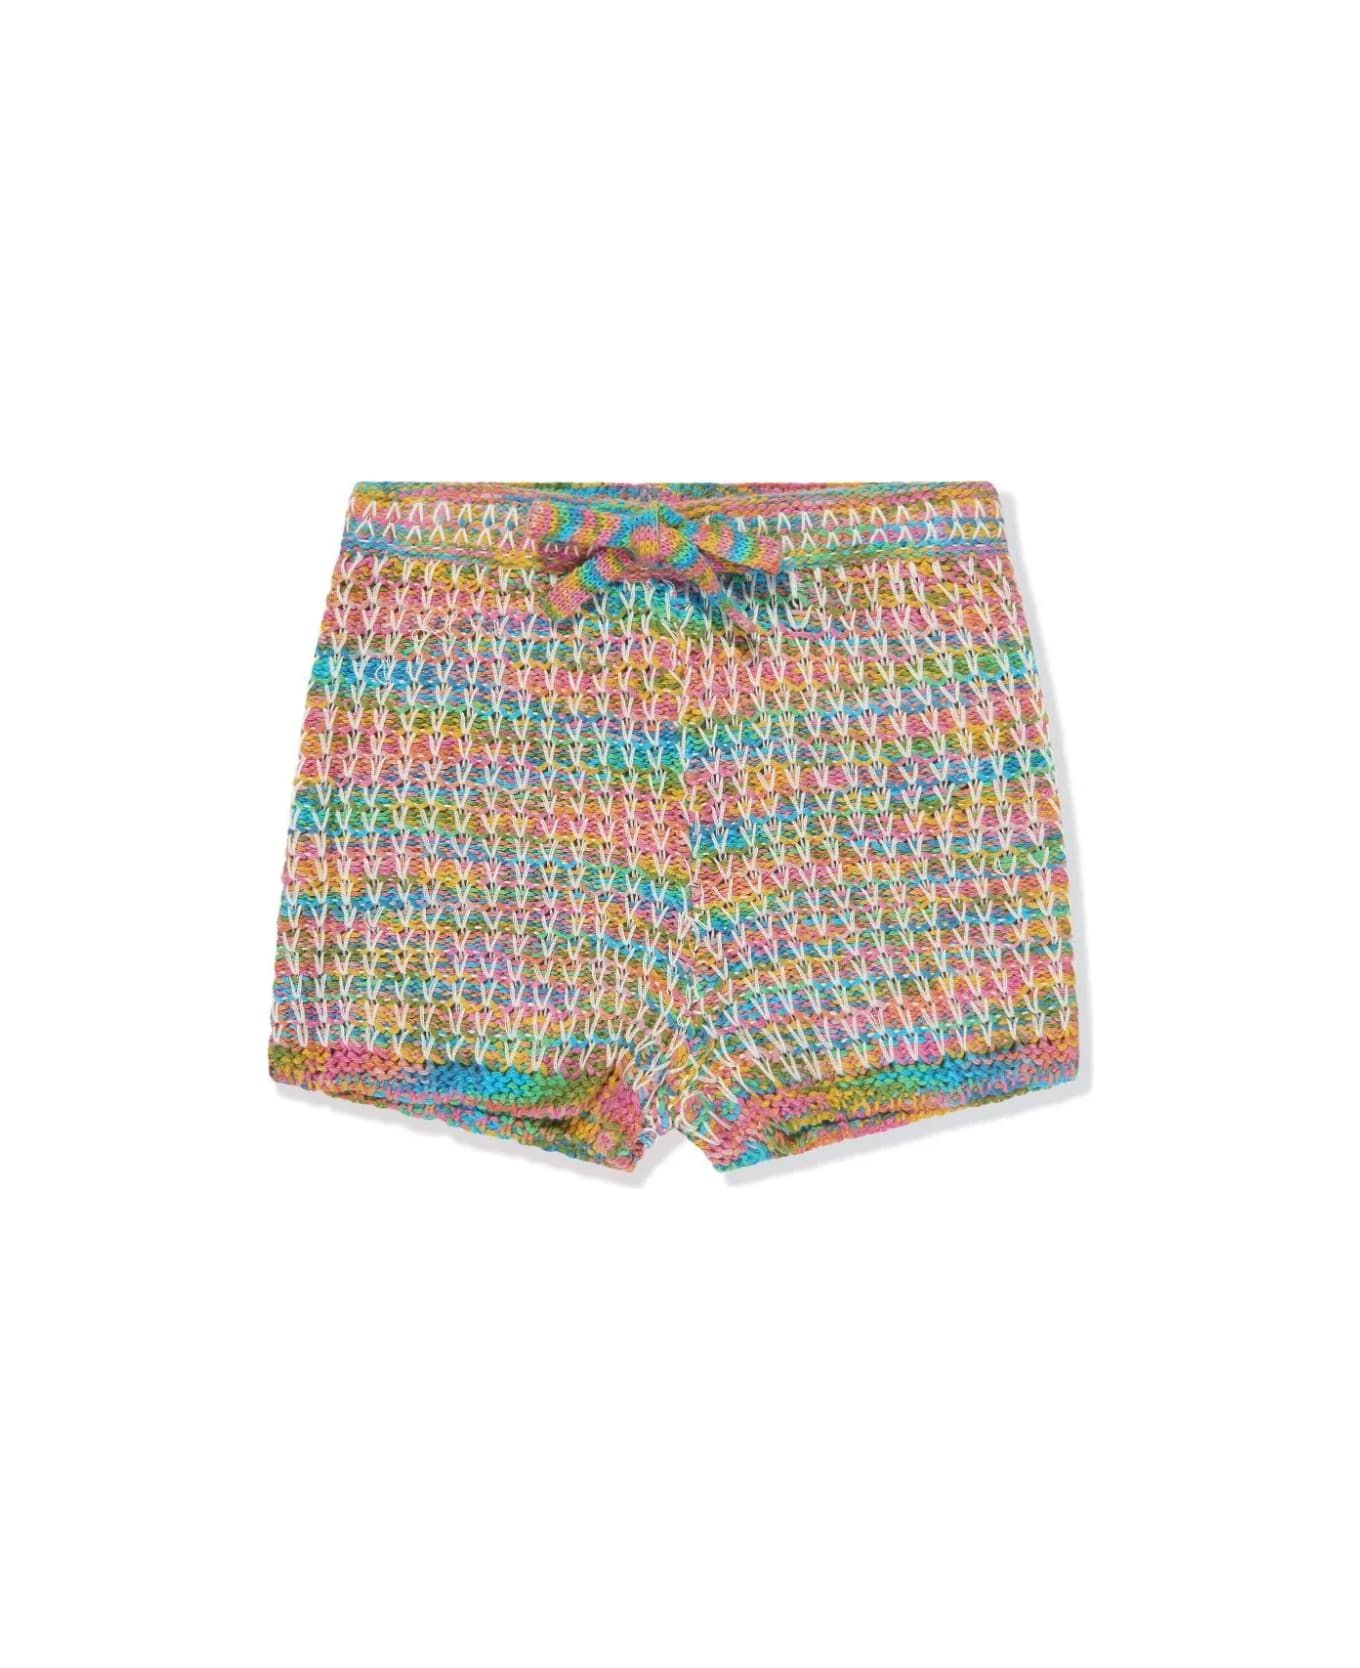 Zimmermann Shorts All'uncinetto August - Multicolor ボトムス